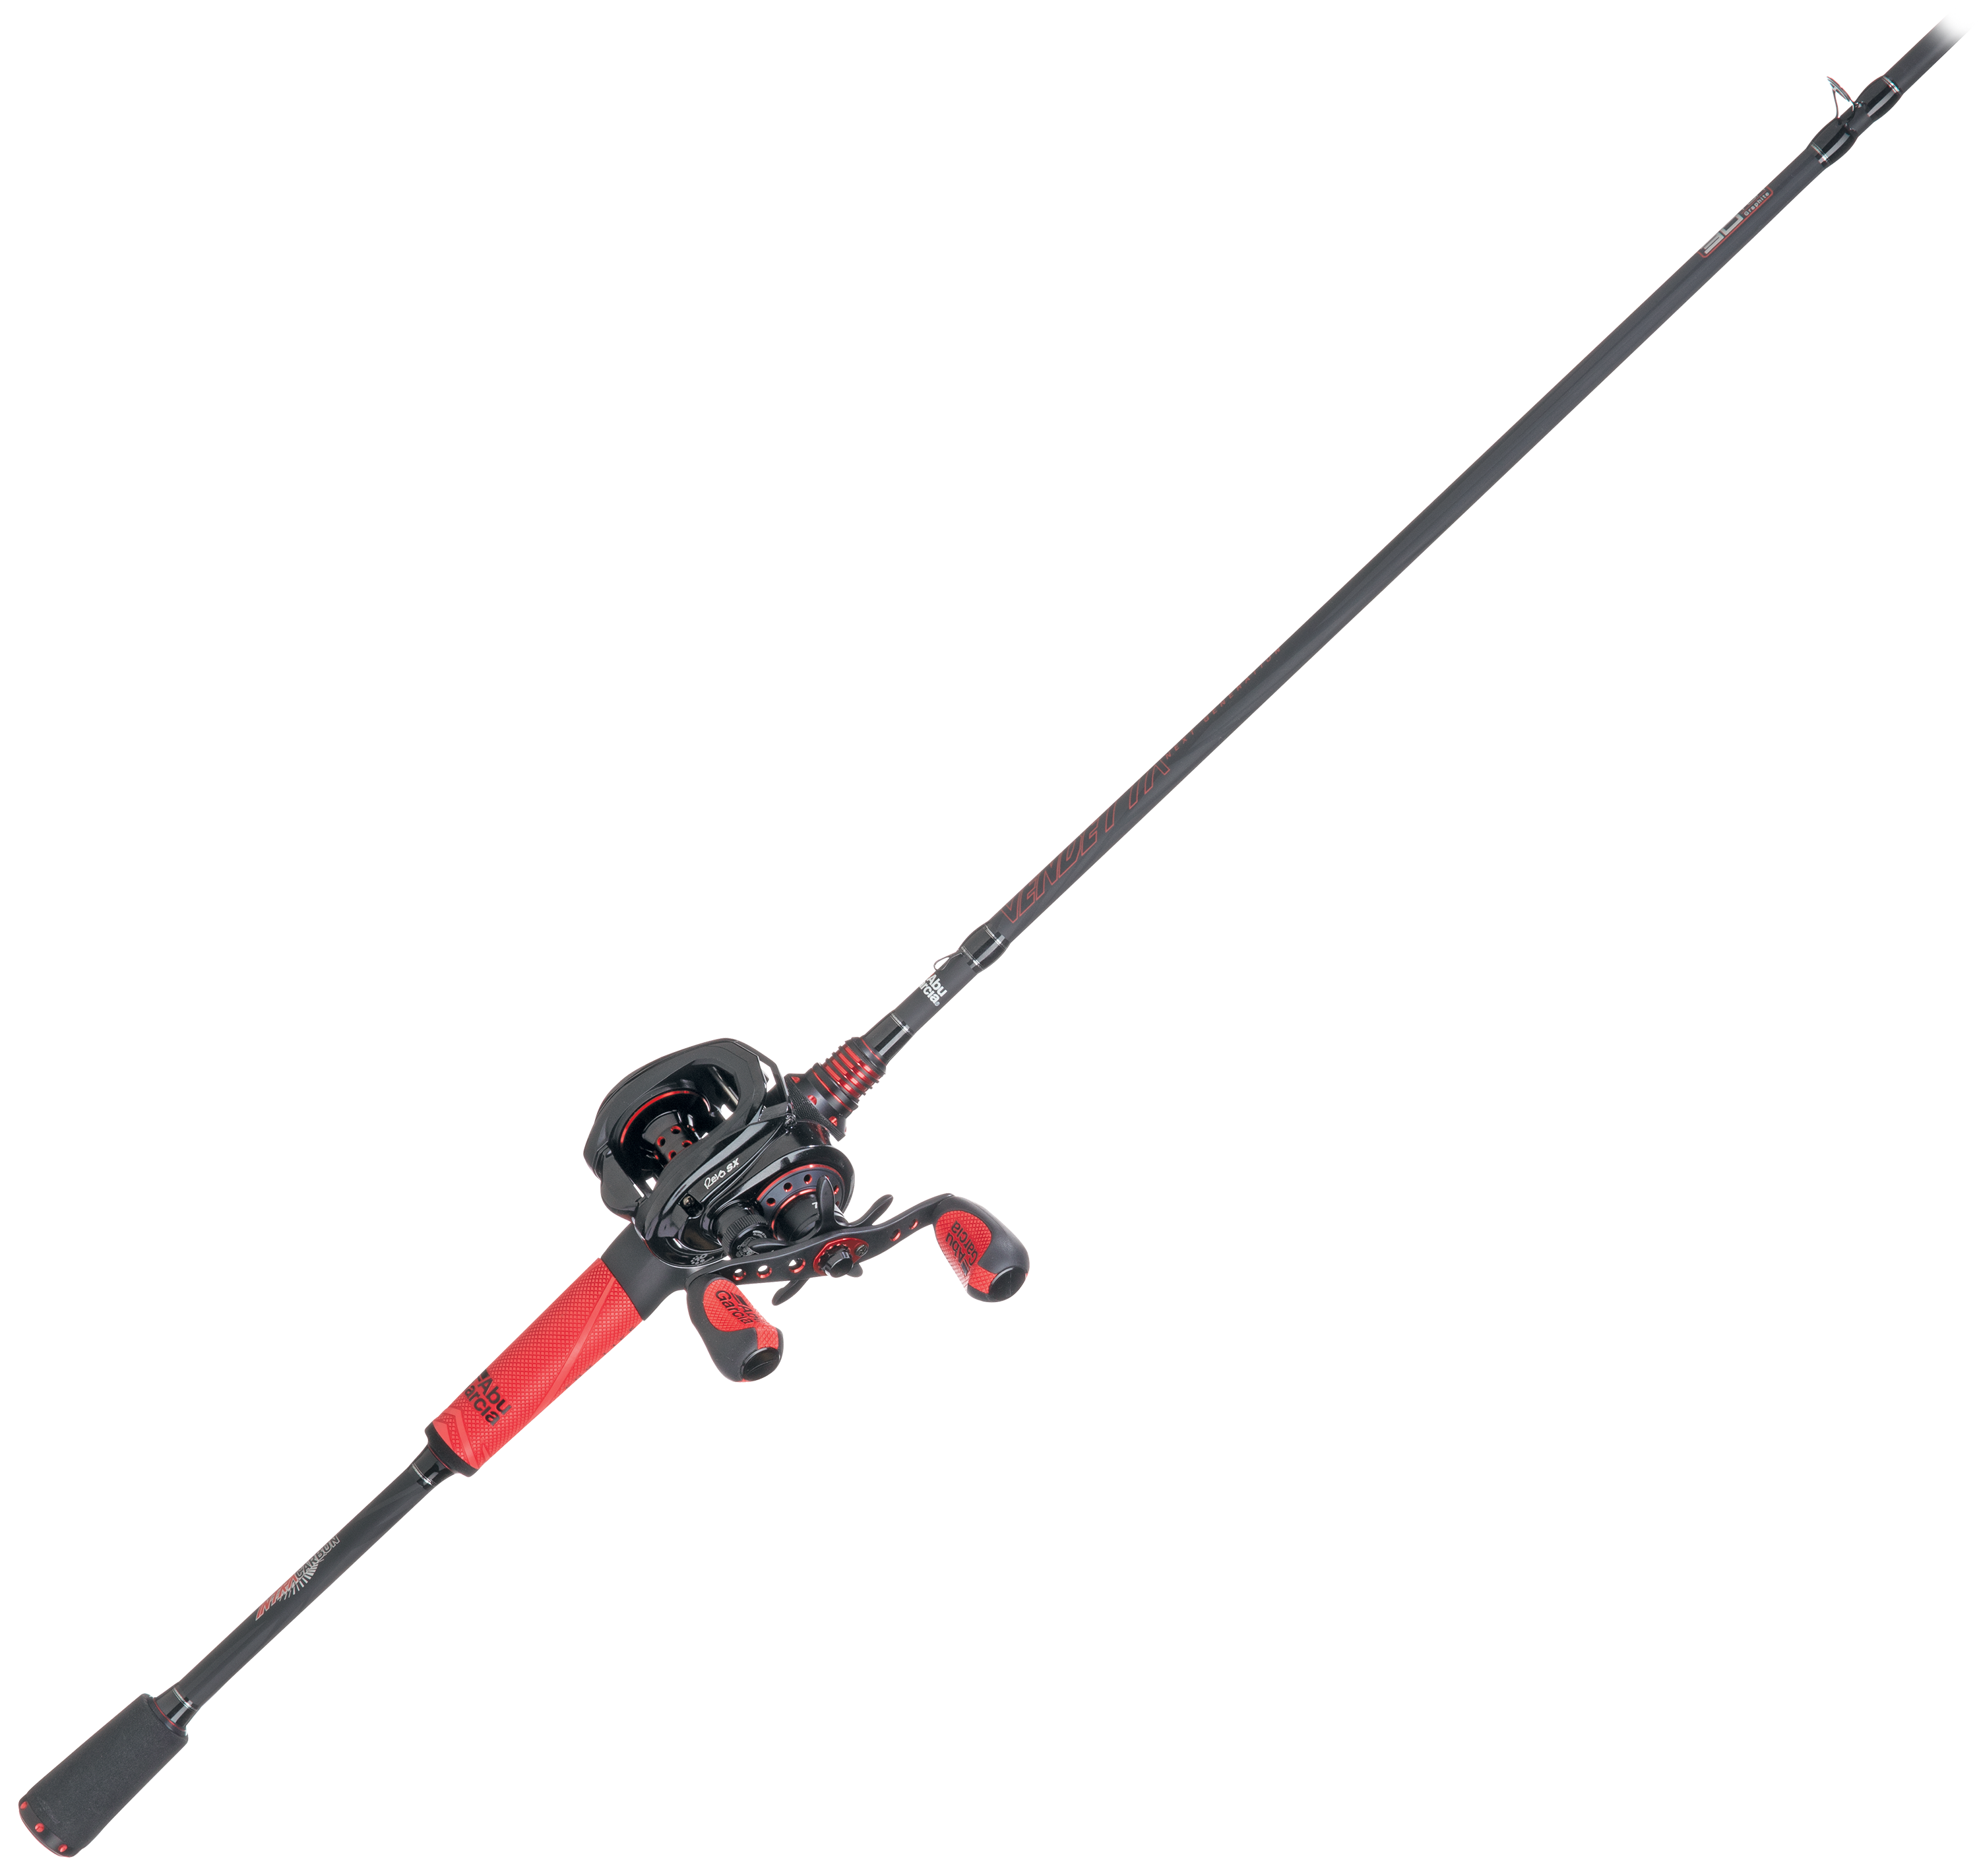 Bass Pro Shops Micro Lite Elite Rod and Reel Spinning Combo